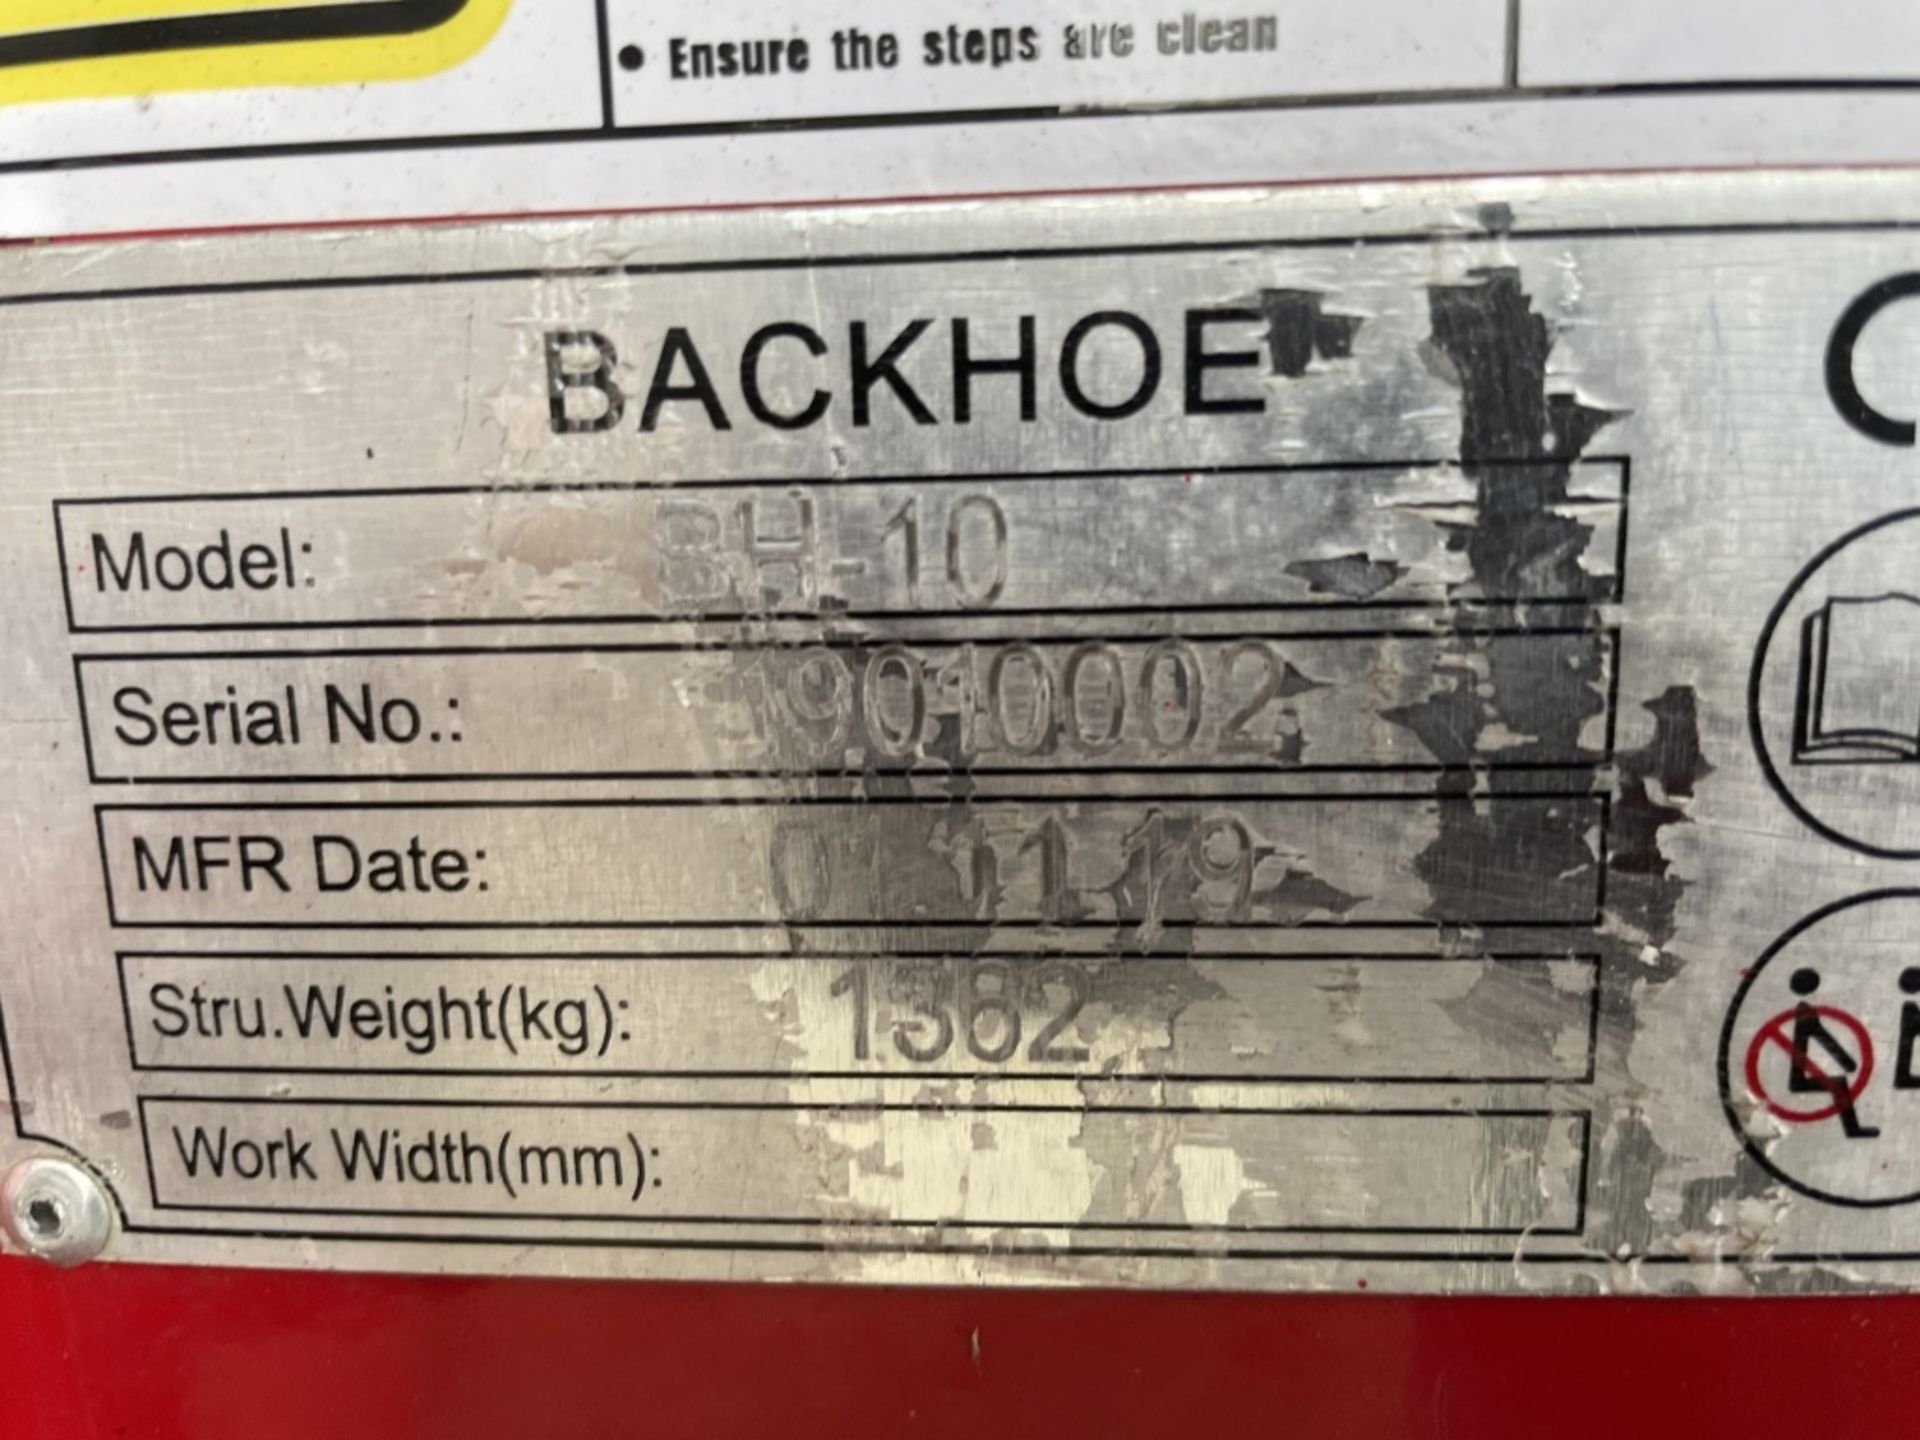 2019 Value Leader BH-10 Backhoe Attachment - Image 8 of 8